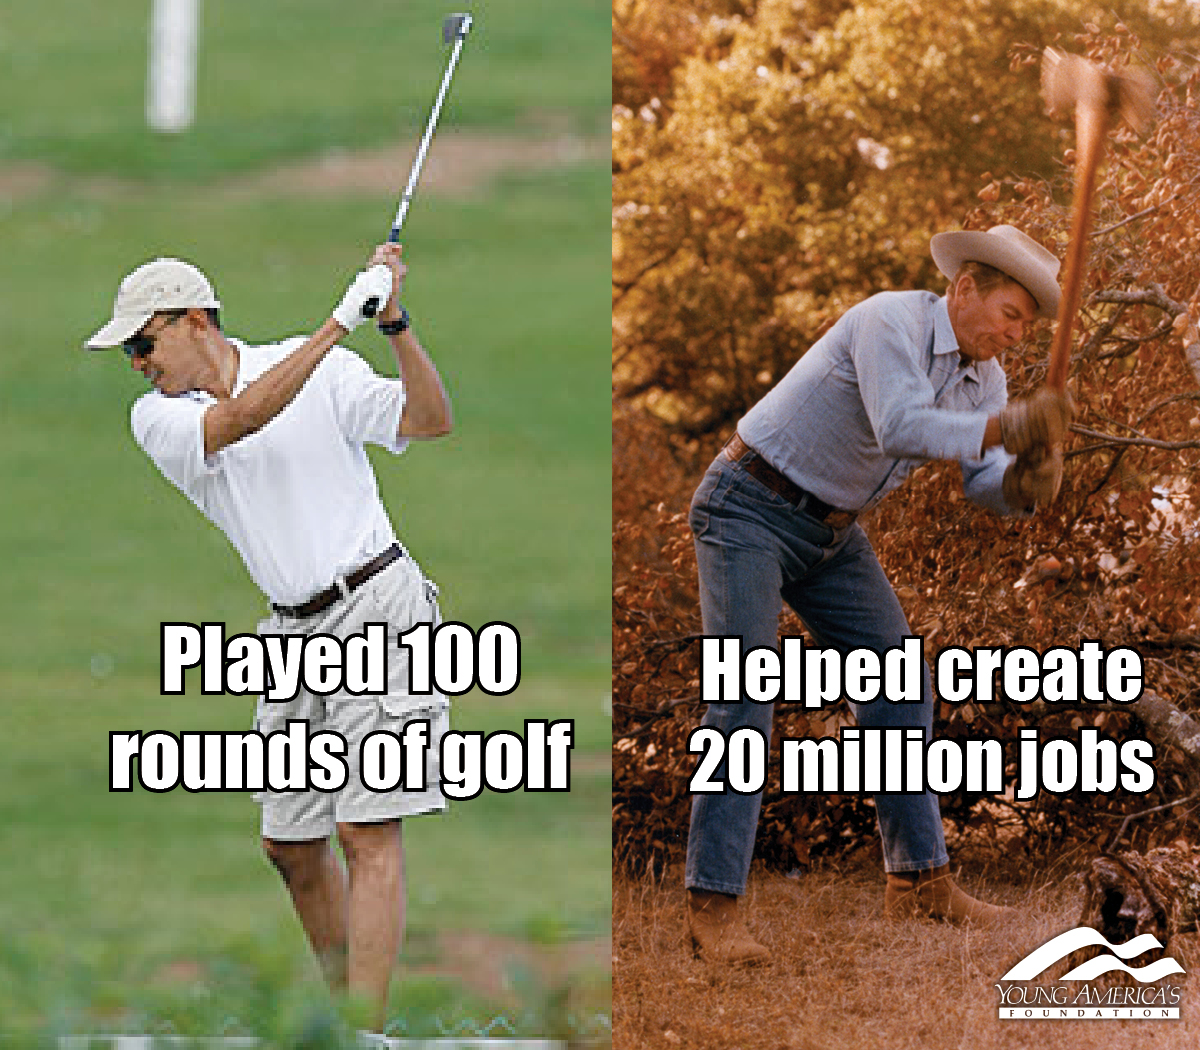 20 Hilarious Obama Golf Pics In Honor Of Obamas 200th Golf Game with The Awesome  golfing meme regarding Home